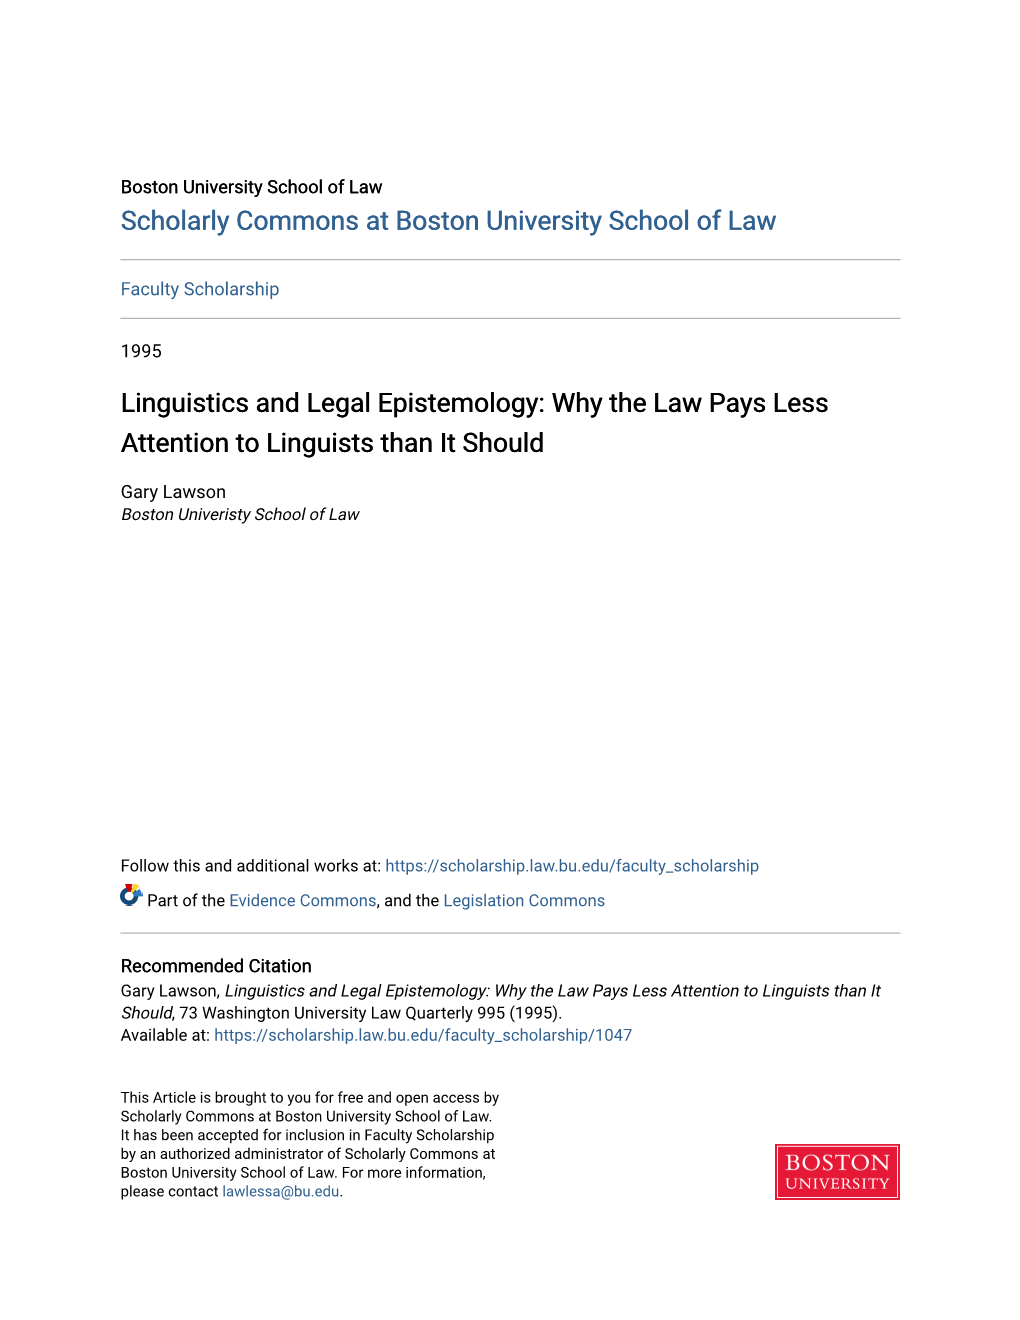 Linguistics and Legal Epistemology: Why the Law Pays Less Attention to Linguists Than It Should